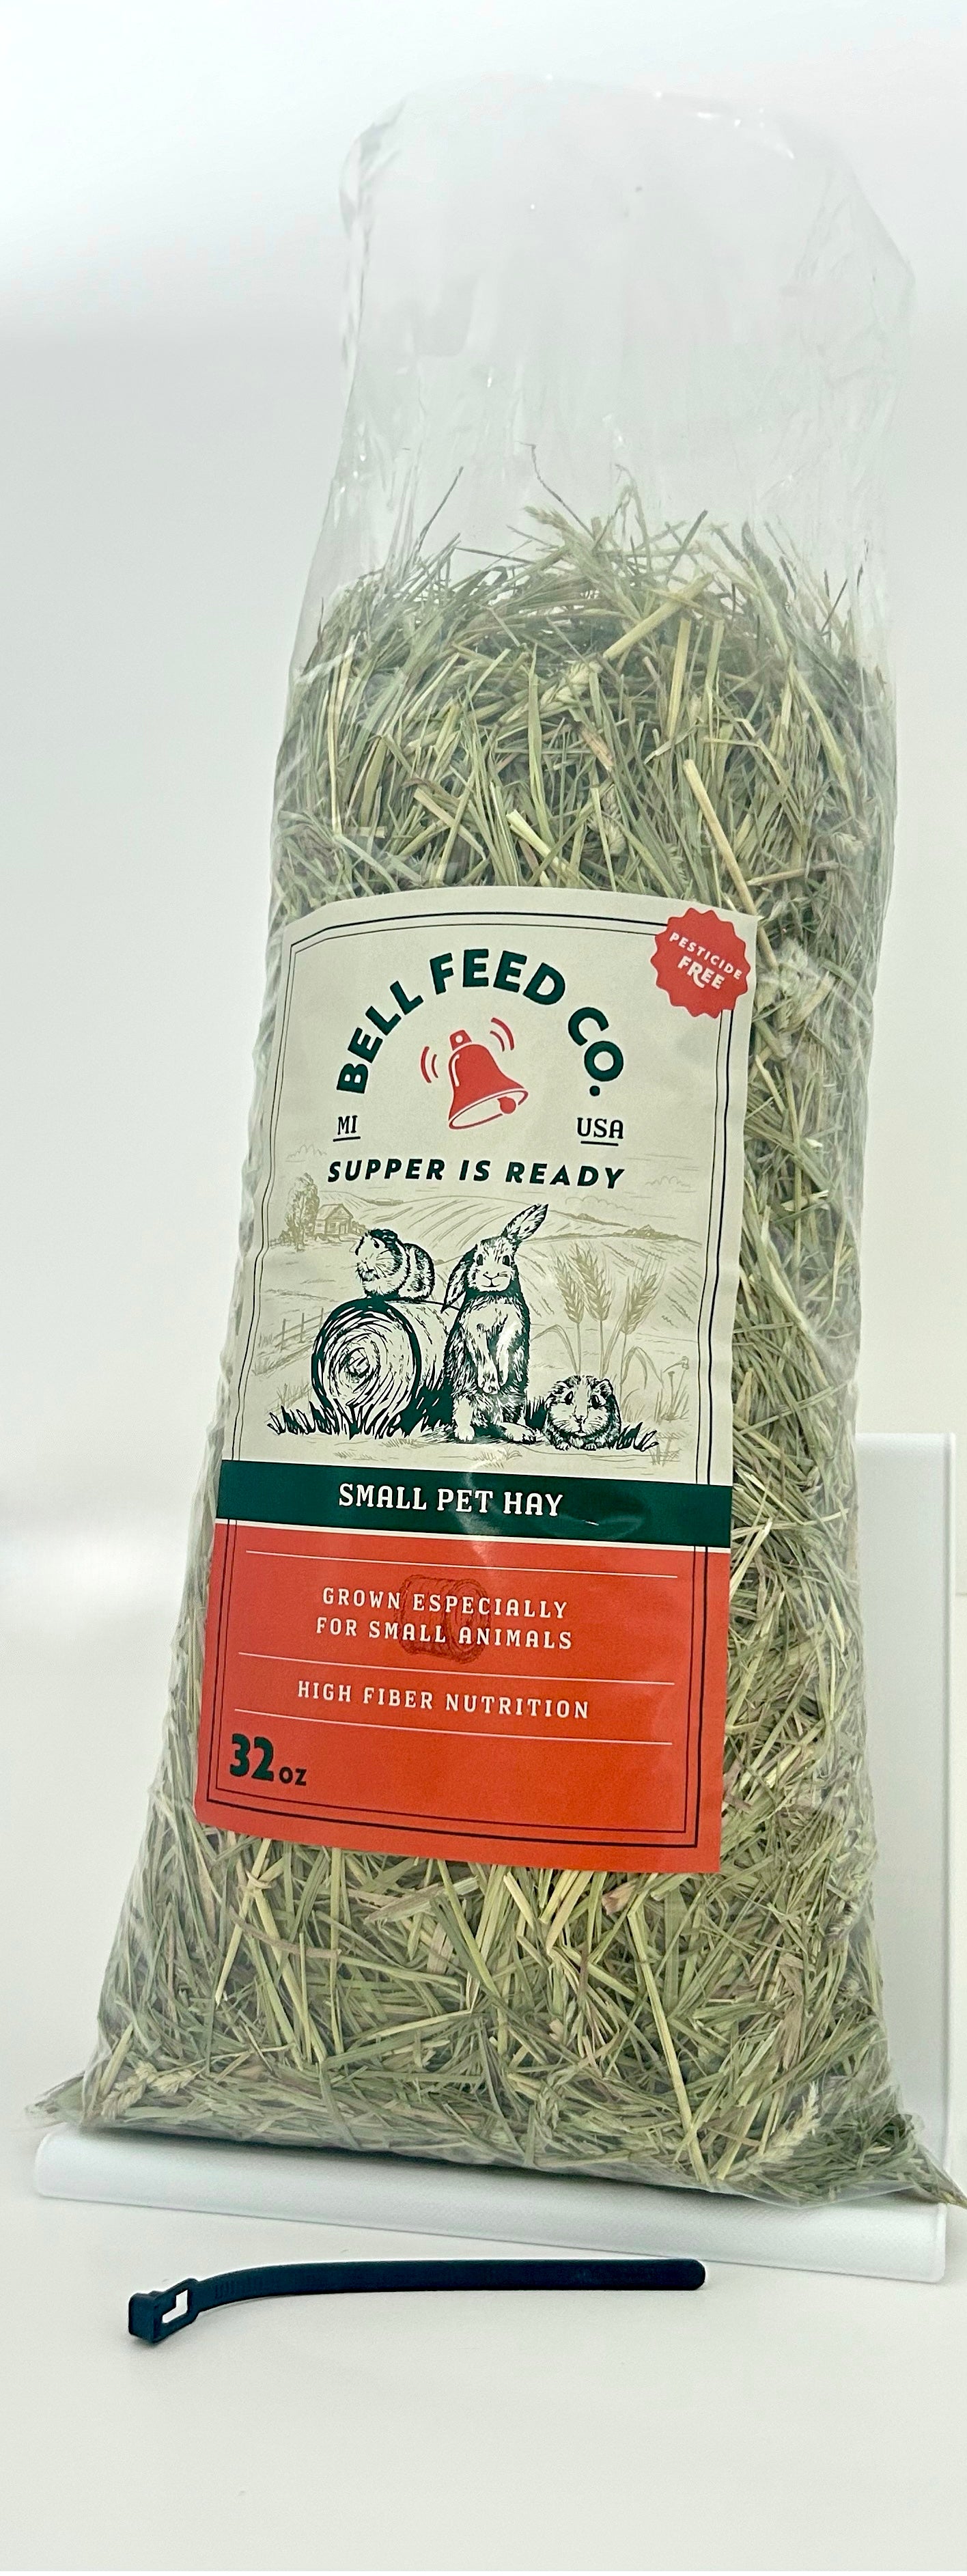 Bell Feed Company Small Pet Hay front view